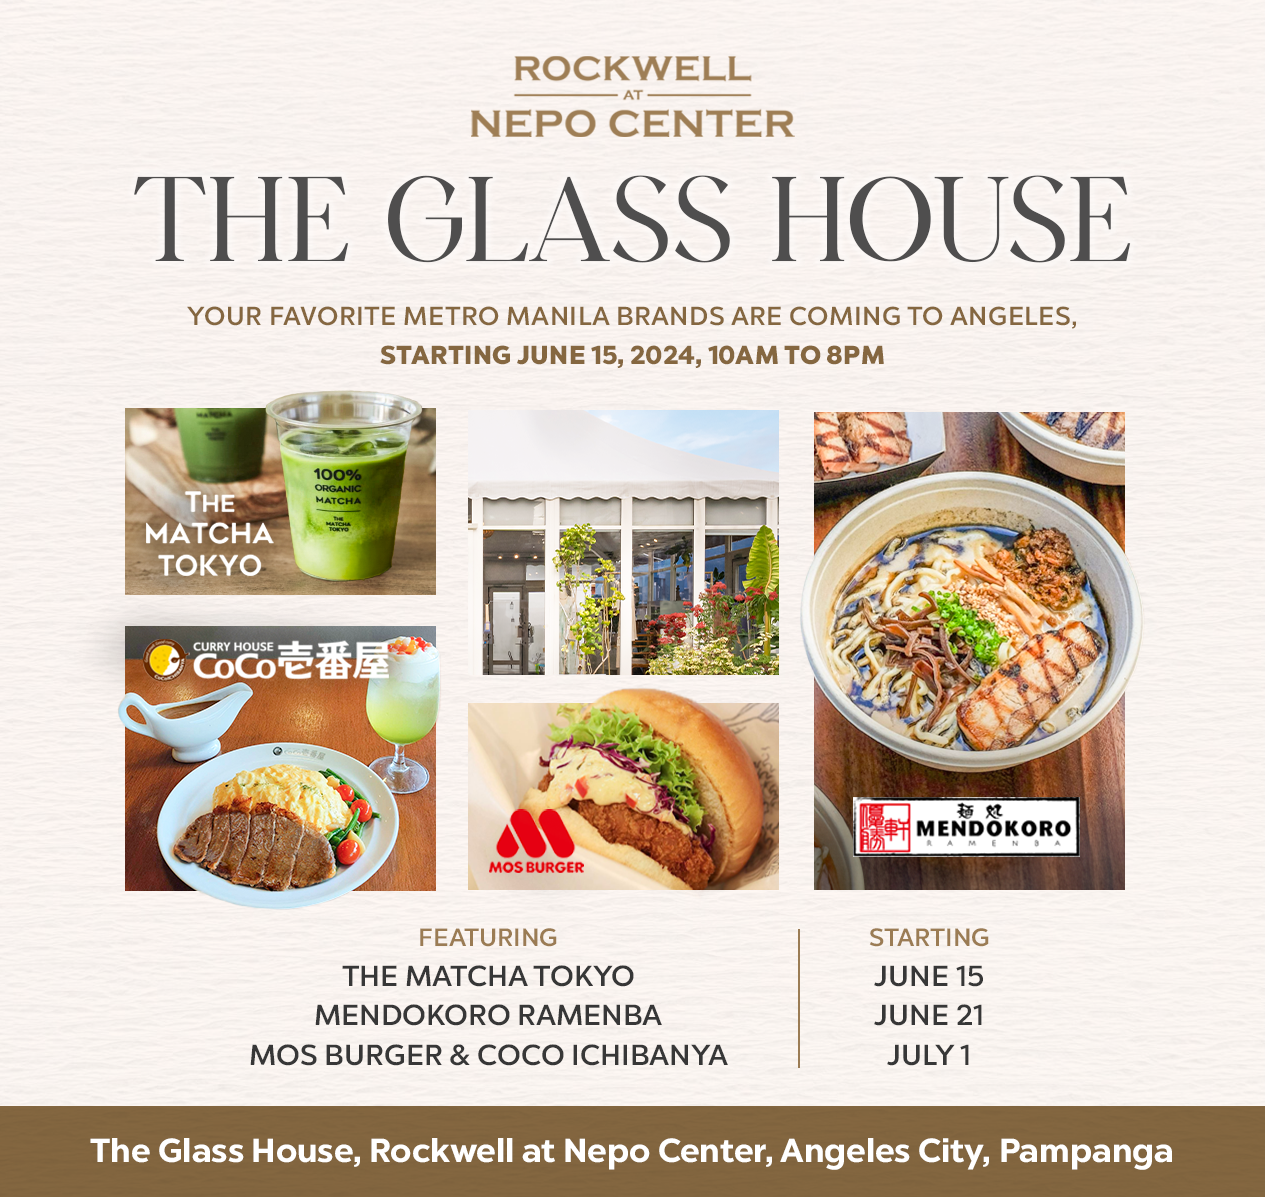 The Glass House at Rockwell at Nepo Center brings Metro Manila flavors to Angeles City, Pampanga